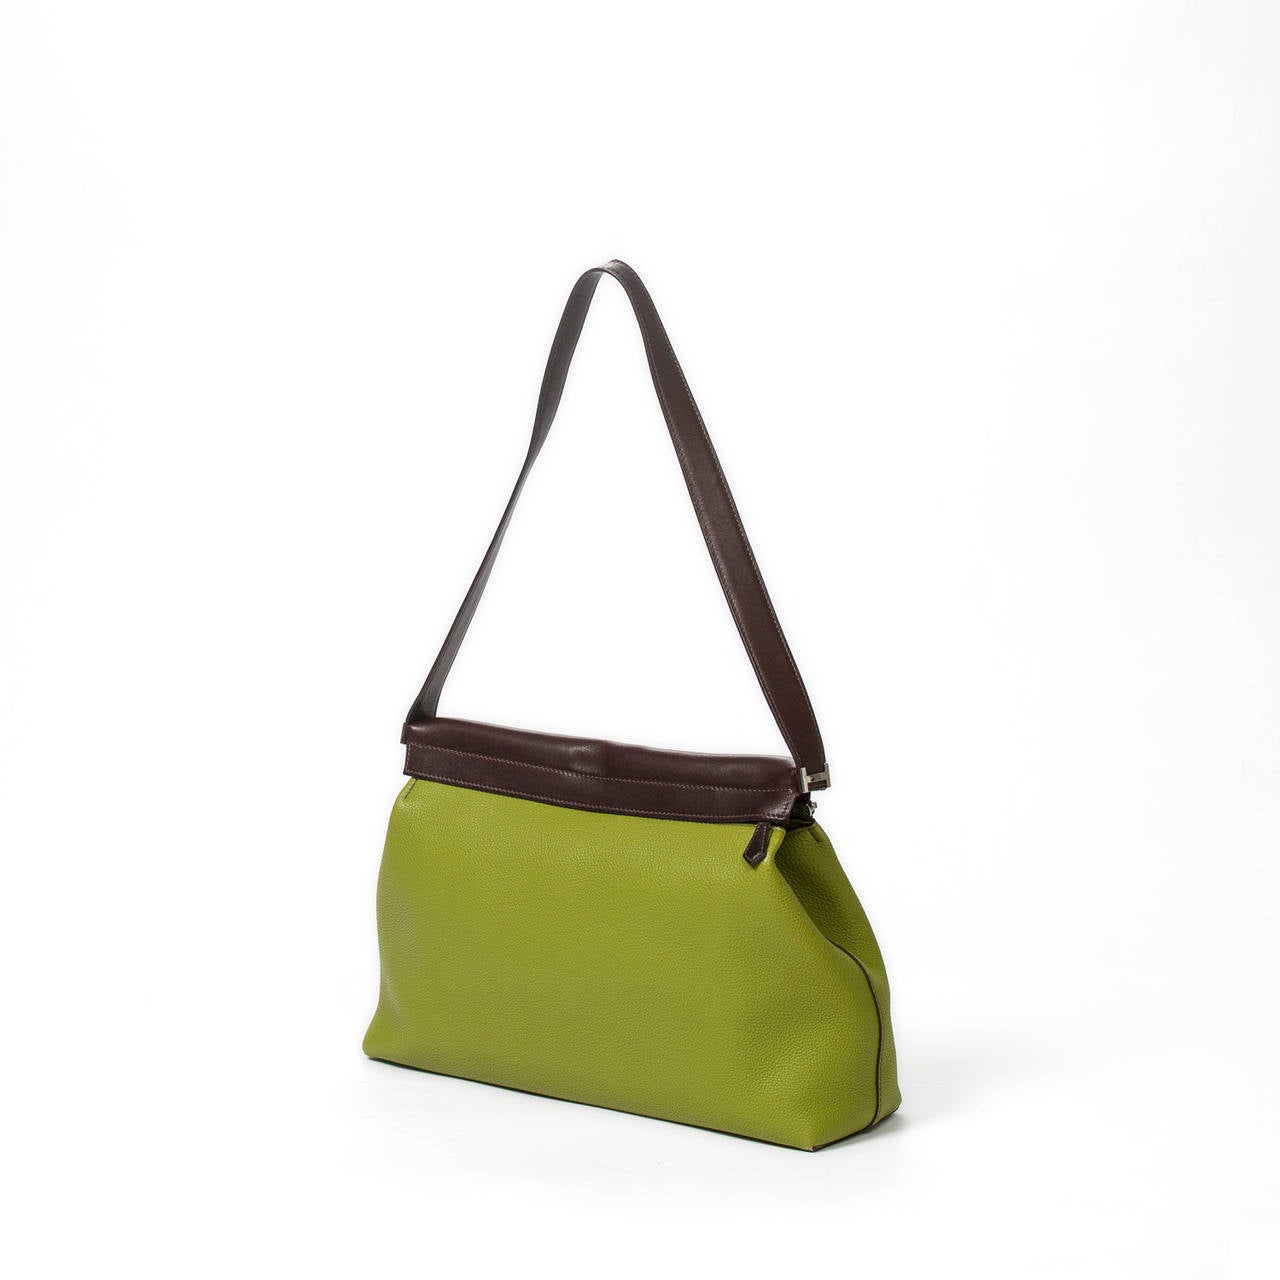 Yeoh bag in green anis togo leather with ebene evercalf leather strap, silver tone hardware. Zipper closure with anis green leather lined interior, 3 slip pockets and pouch in beige ottoman canvas. Stamp E in square (2001). Box and dustbag included.